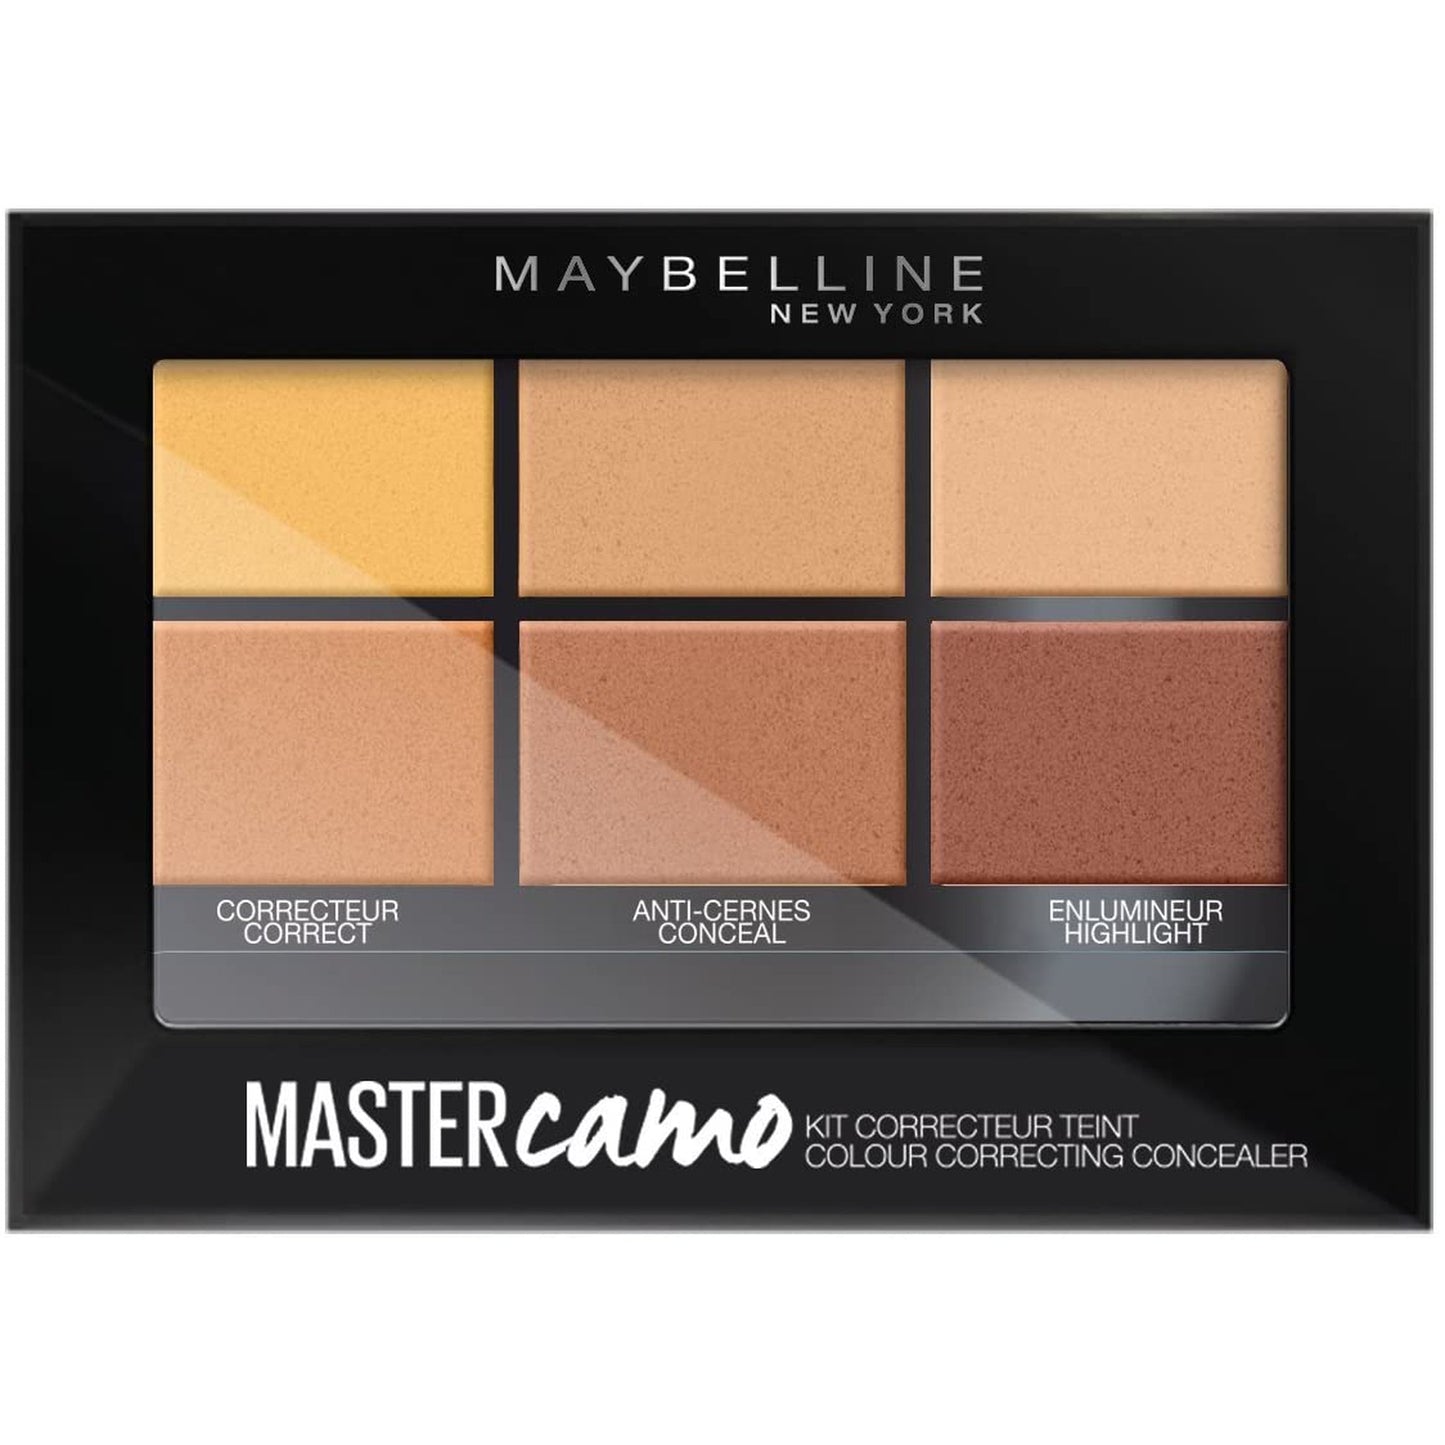 Maybelline Master Camo Color Correcting Concealer Kit 02 Medium-Maybelline-BeautyNmakeup.co.uk